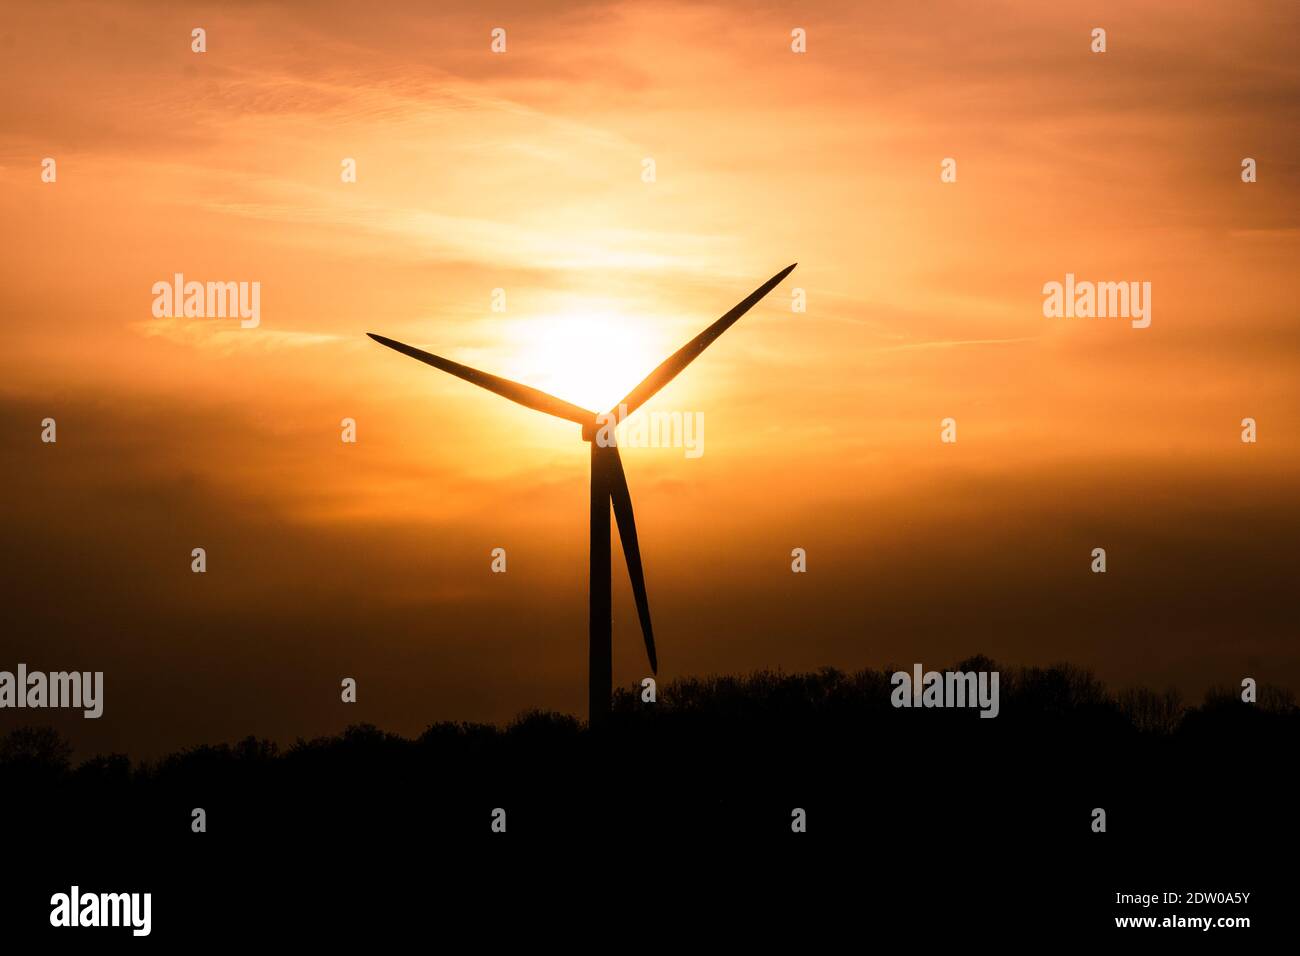 single wind turbine silhouettes at cloudy golden sunset Stock Photo